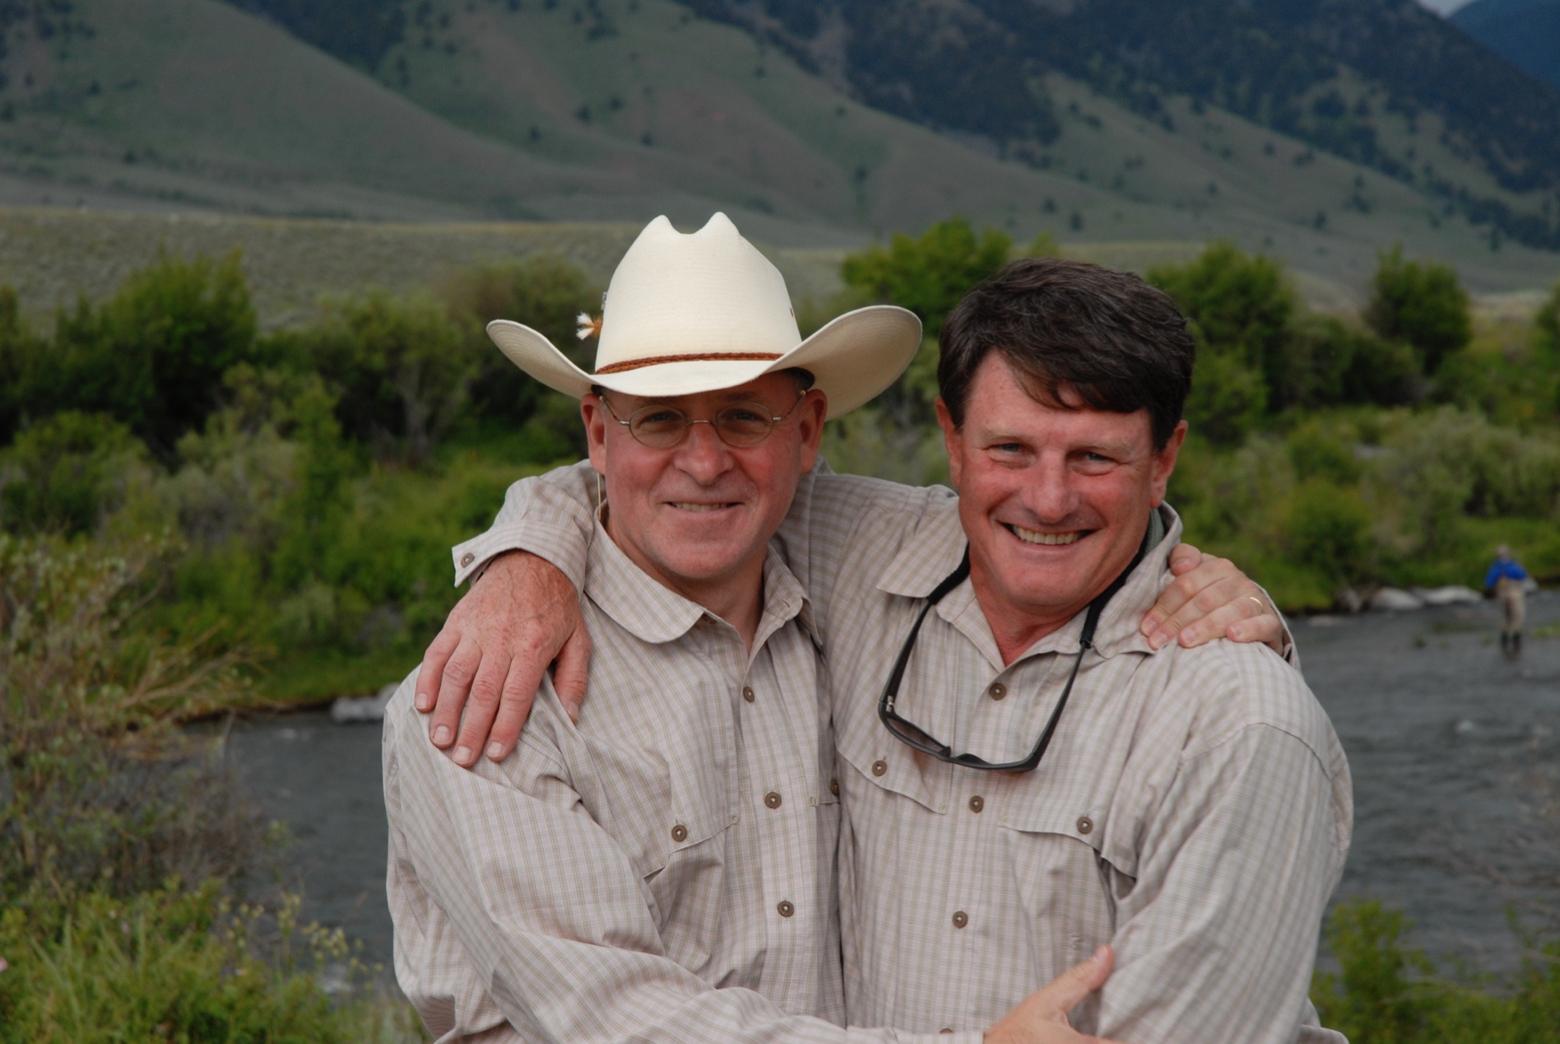 Tom Sadler, in cowboy hat, with two late friends in Montana's Madison Valley, who shaped his thinking about working across the political aisle to make good things happen.  At top:  With Alex Diekmann, the Bozeman-based deal maker with the Trust for Public Land, who helped protect more than 100,000 acres of public and private land in the Northern Rockies, important for wildlife habitat conservation, migration corridors and public access.  Just above: Sadler and the late Jim Range, a life-long outdoors person who served as chief counsel to US Sen. Howard Baker of Tennessee, when the senator was Majority Leader in the senate.  Range was a champion of bringing America's public land legacy to the attention of young people of all backgrounds, especially inner city kids, helping them solidify their attachment to nature through hiking, hunting, fishing and science. Range helped draft language that appeared in the Clean Water Act and he co-founded the Theodore Roosevelt Conservation Partnership. Photos courtesy Tom Sadler.